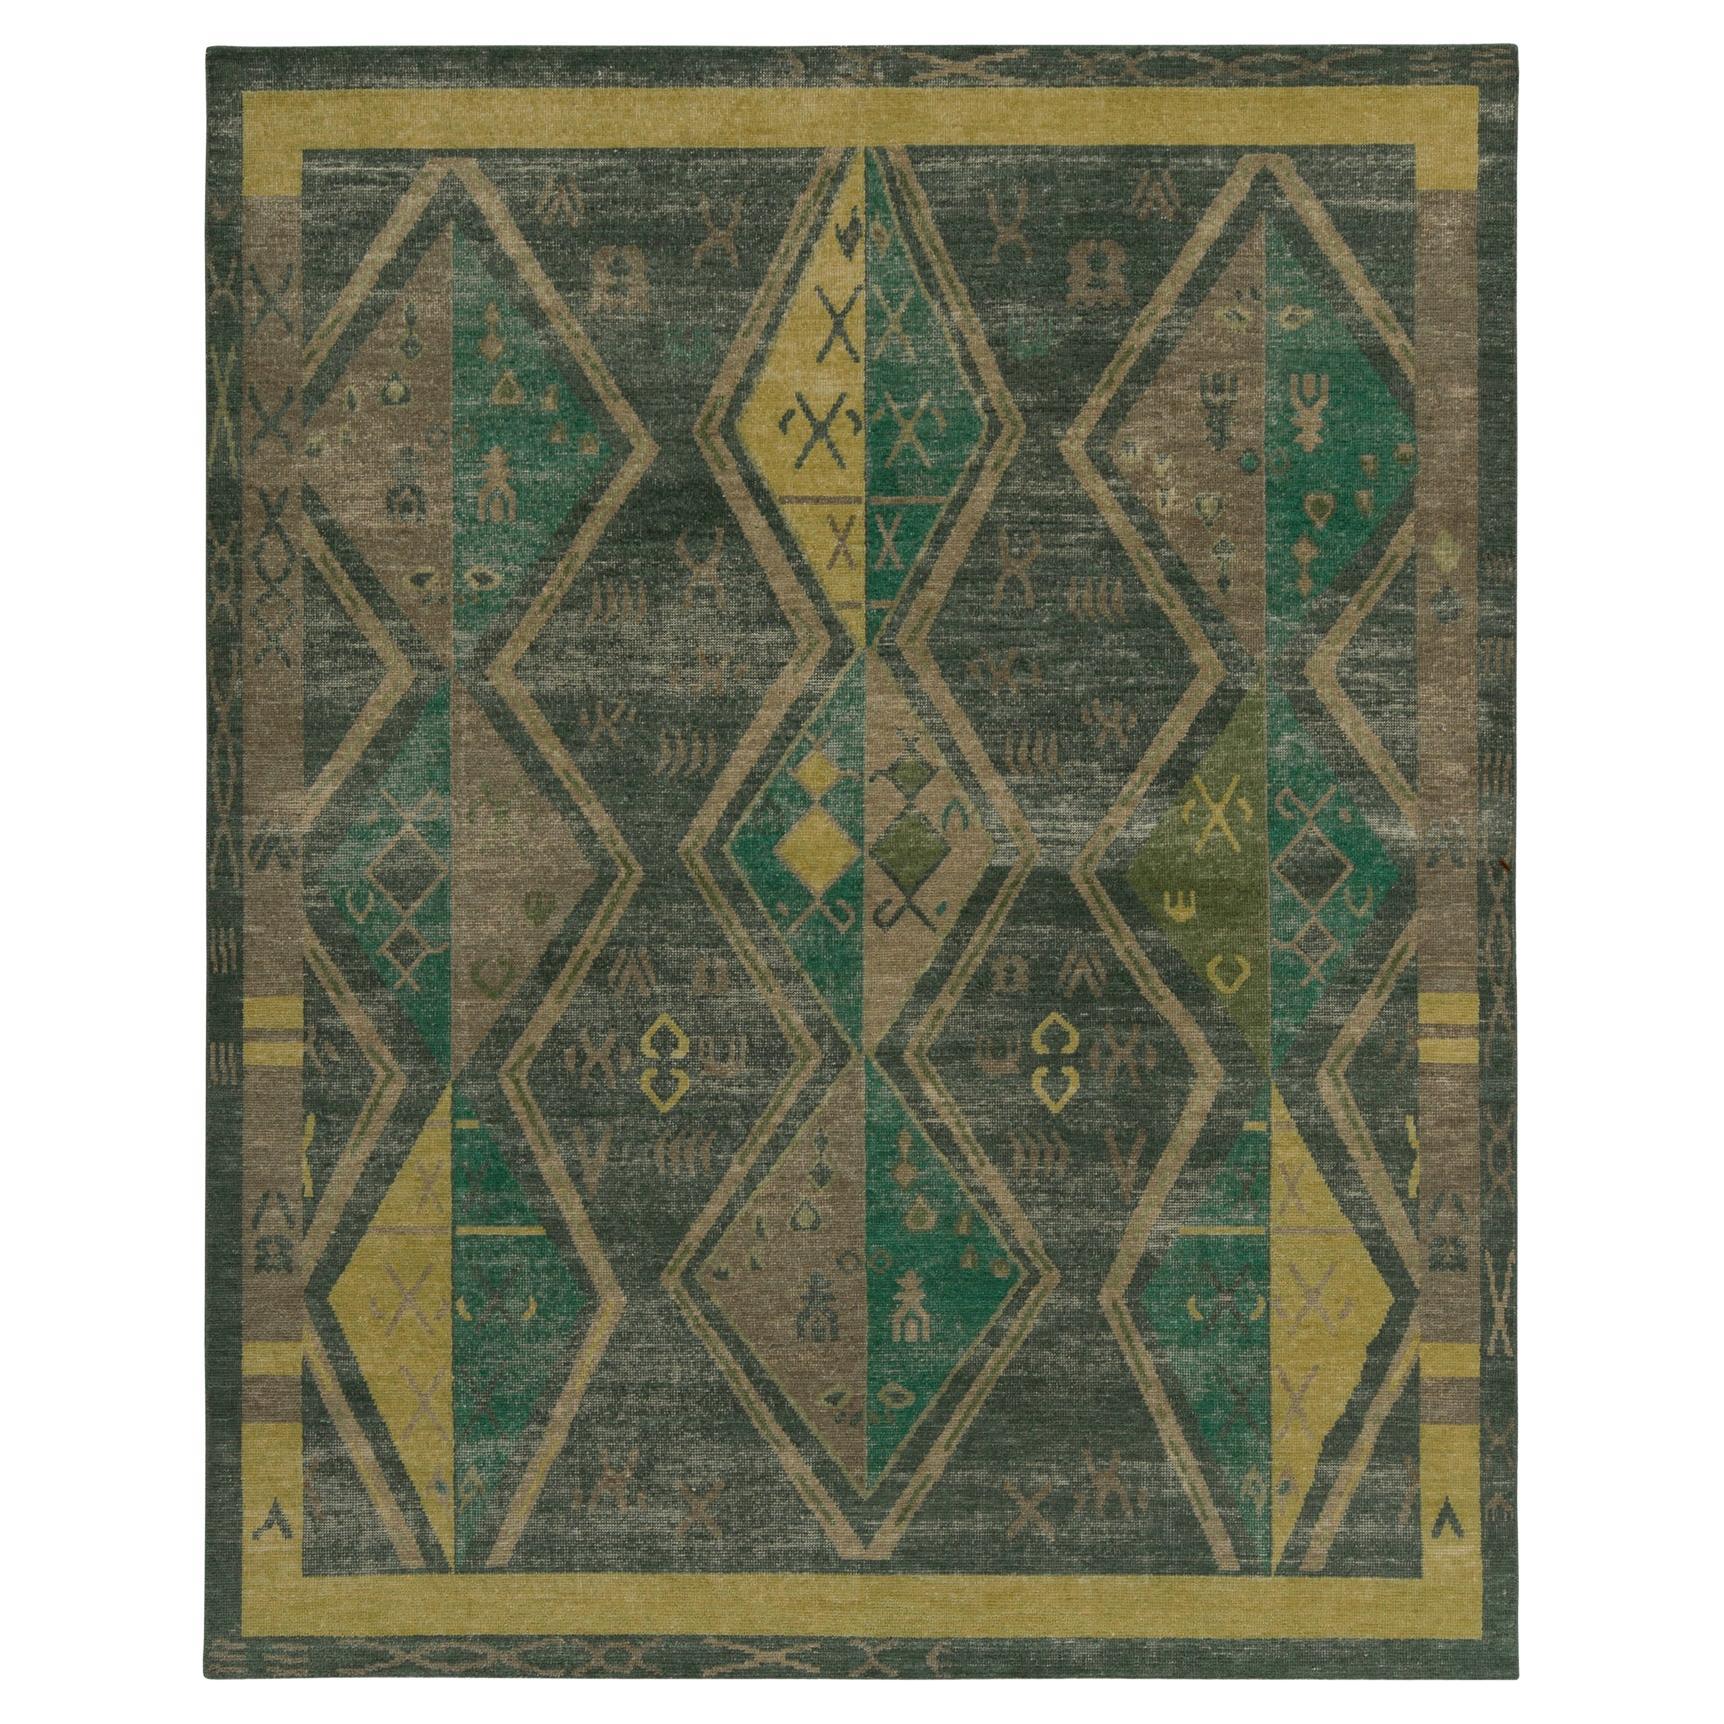 Rug & Kilim’s Distressed Style Rug in Green & Brown Geometric Patterns For Sale